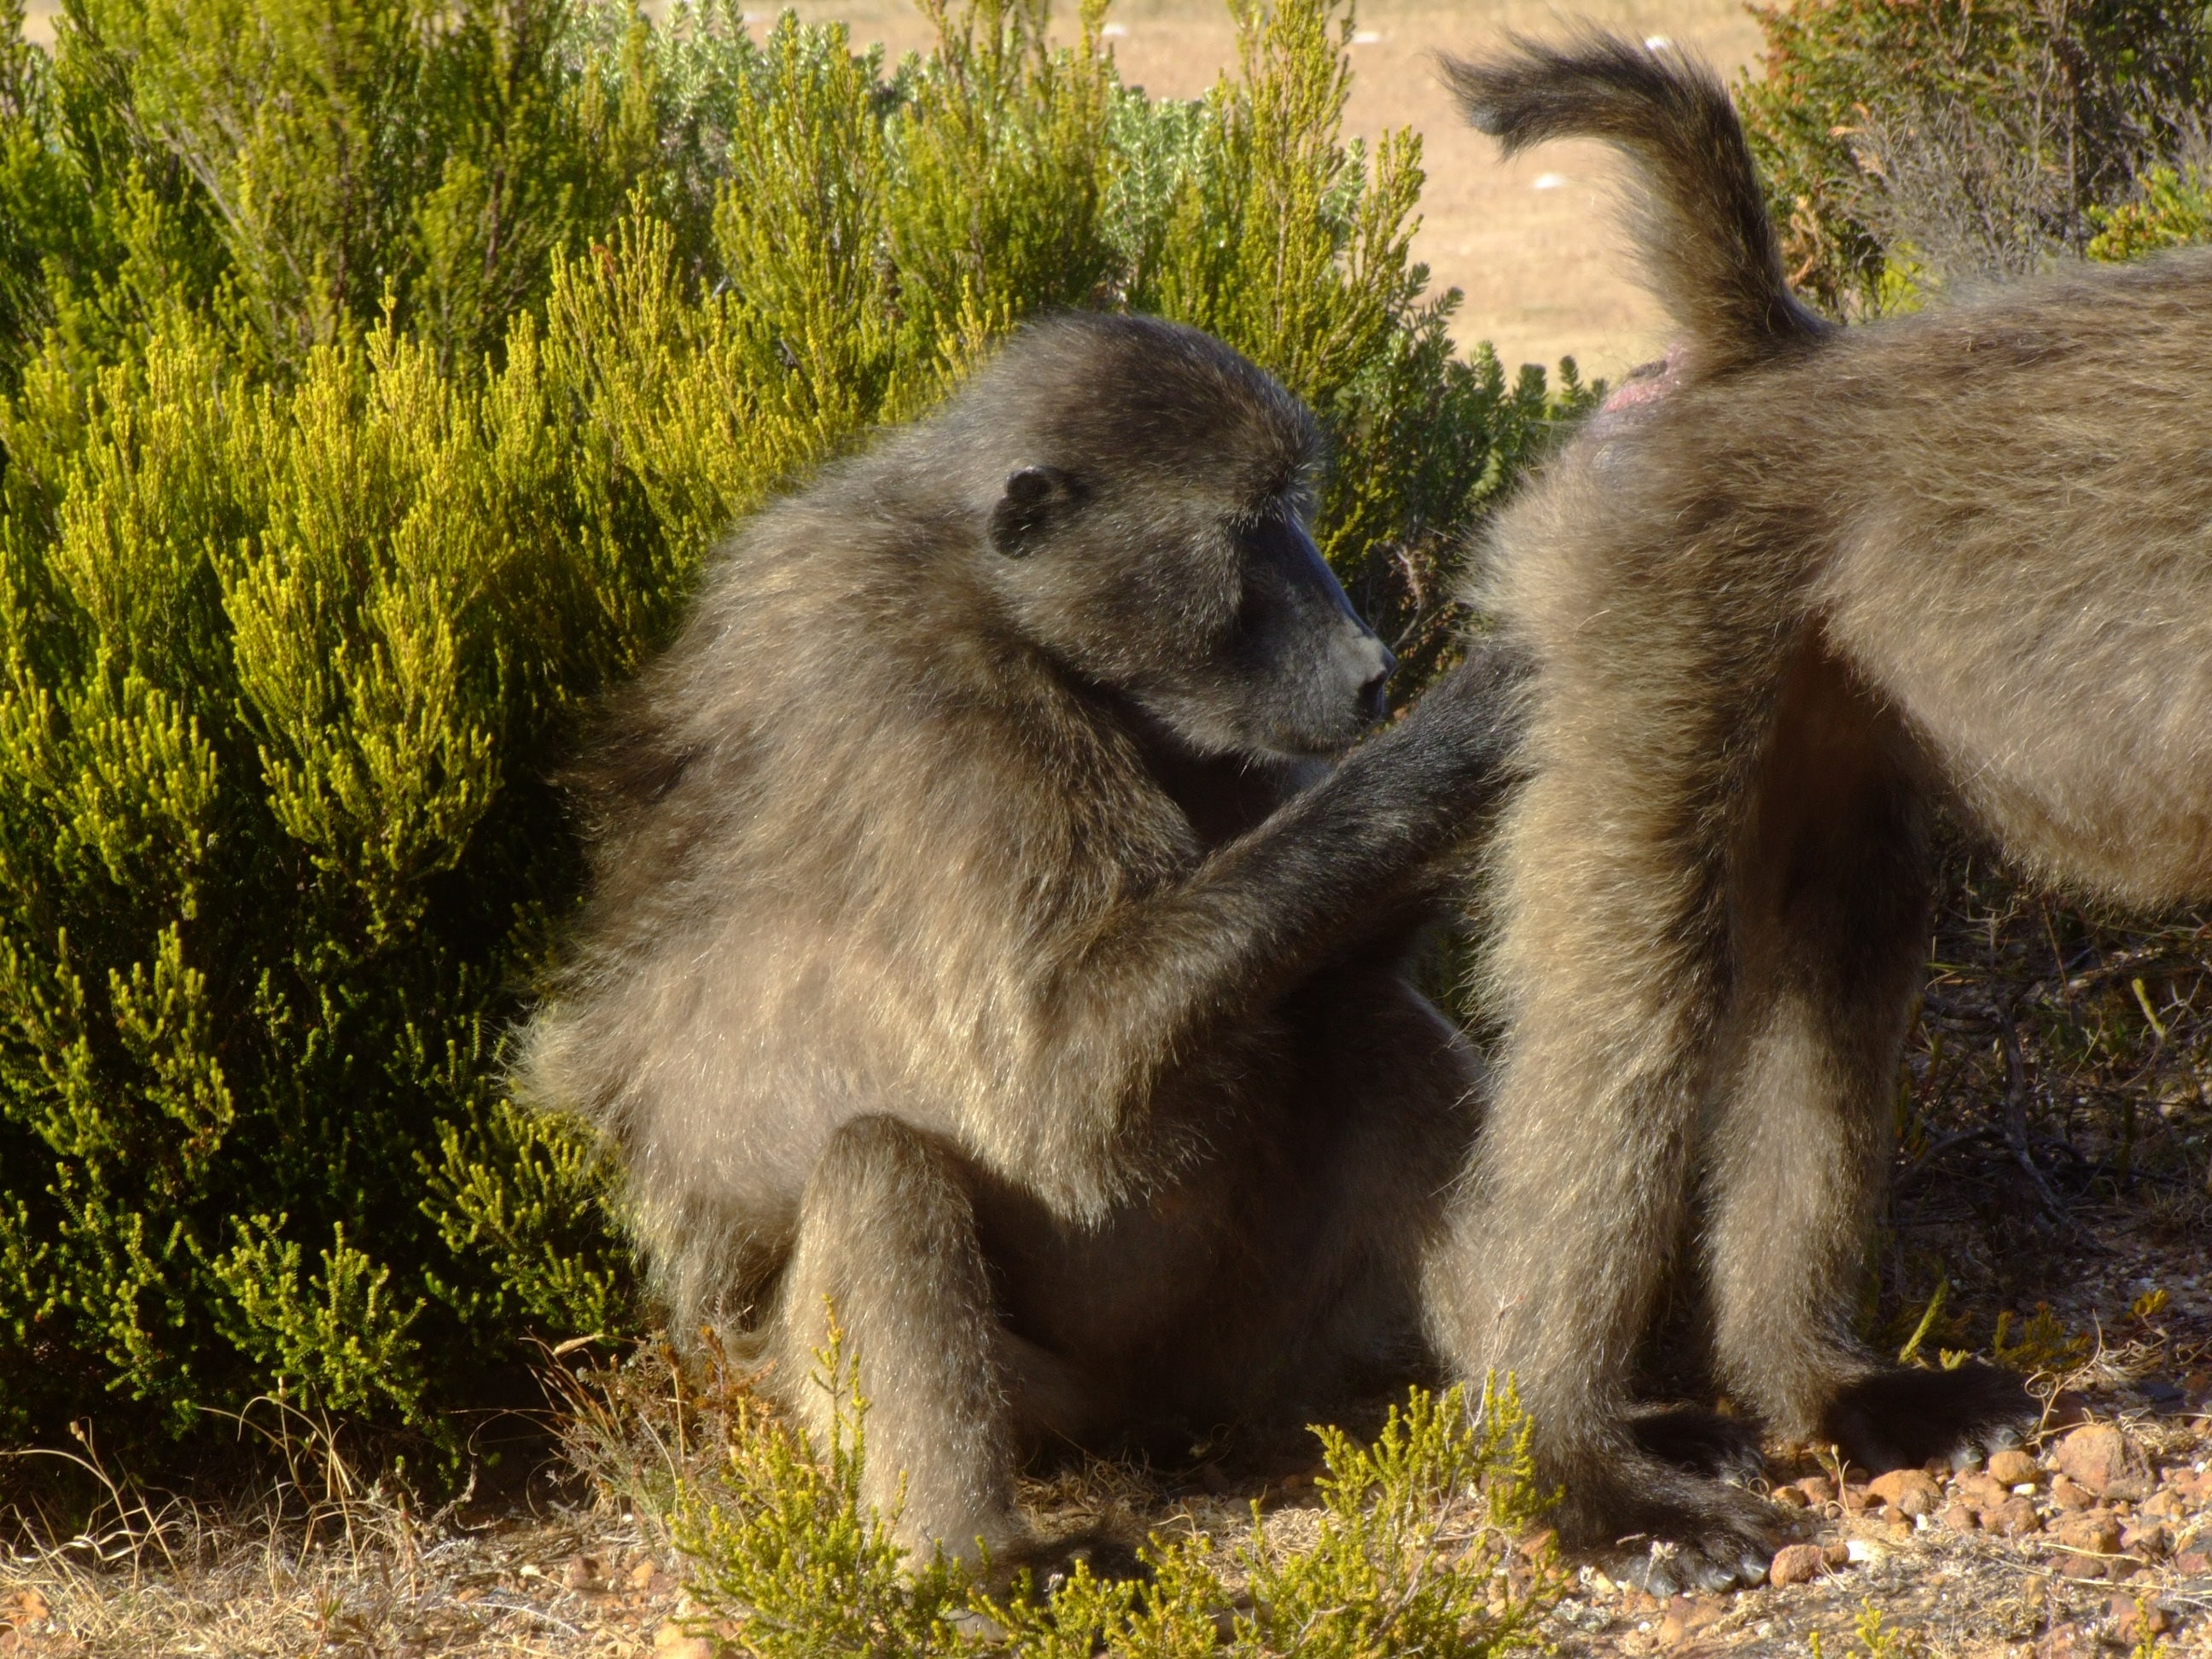 two grey baboon beside green plant during daytime